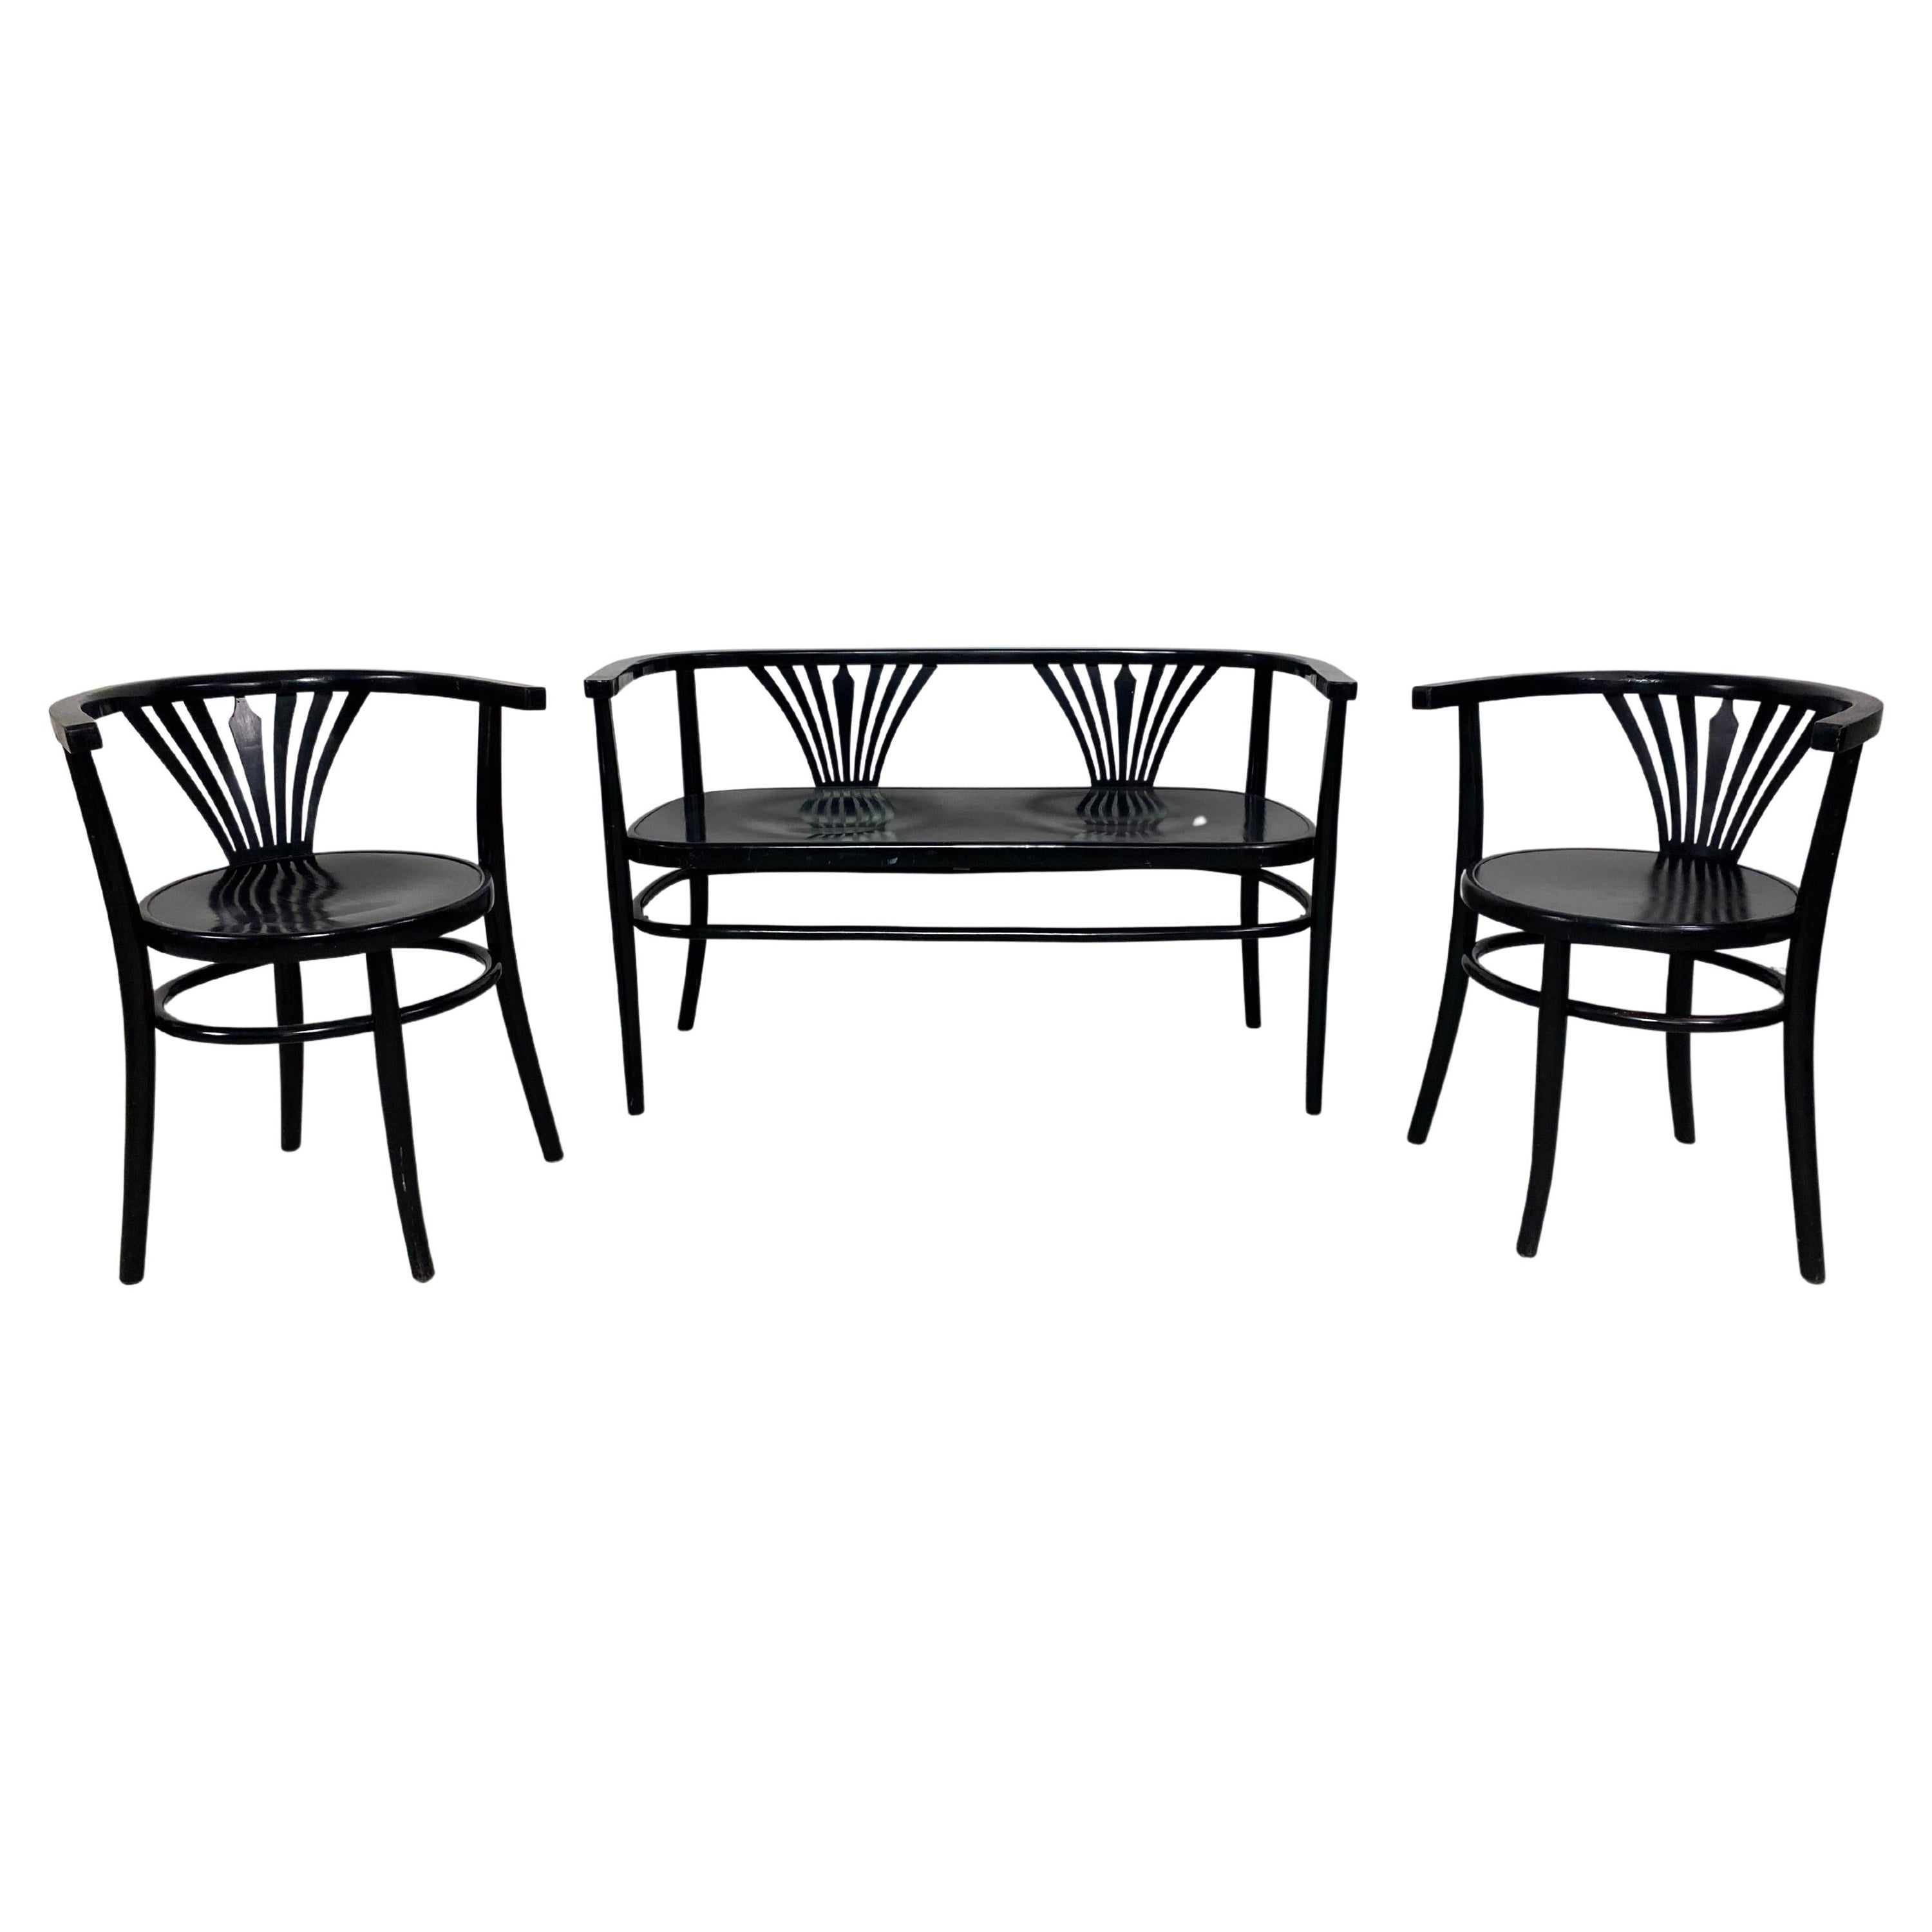 Black secession seating group by Fischel For Sale